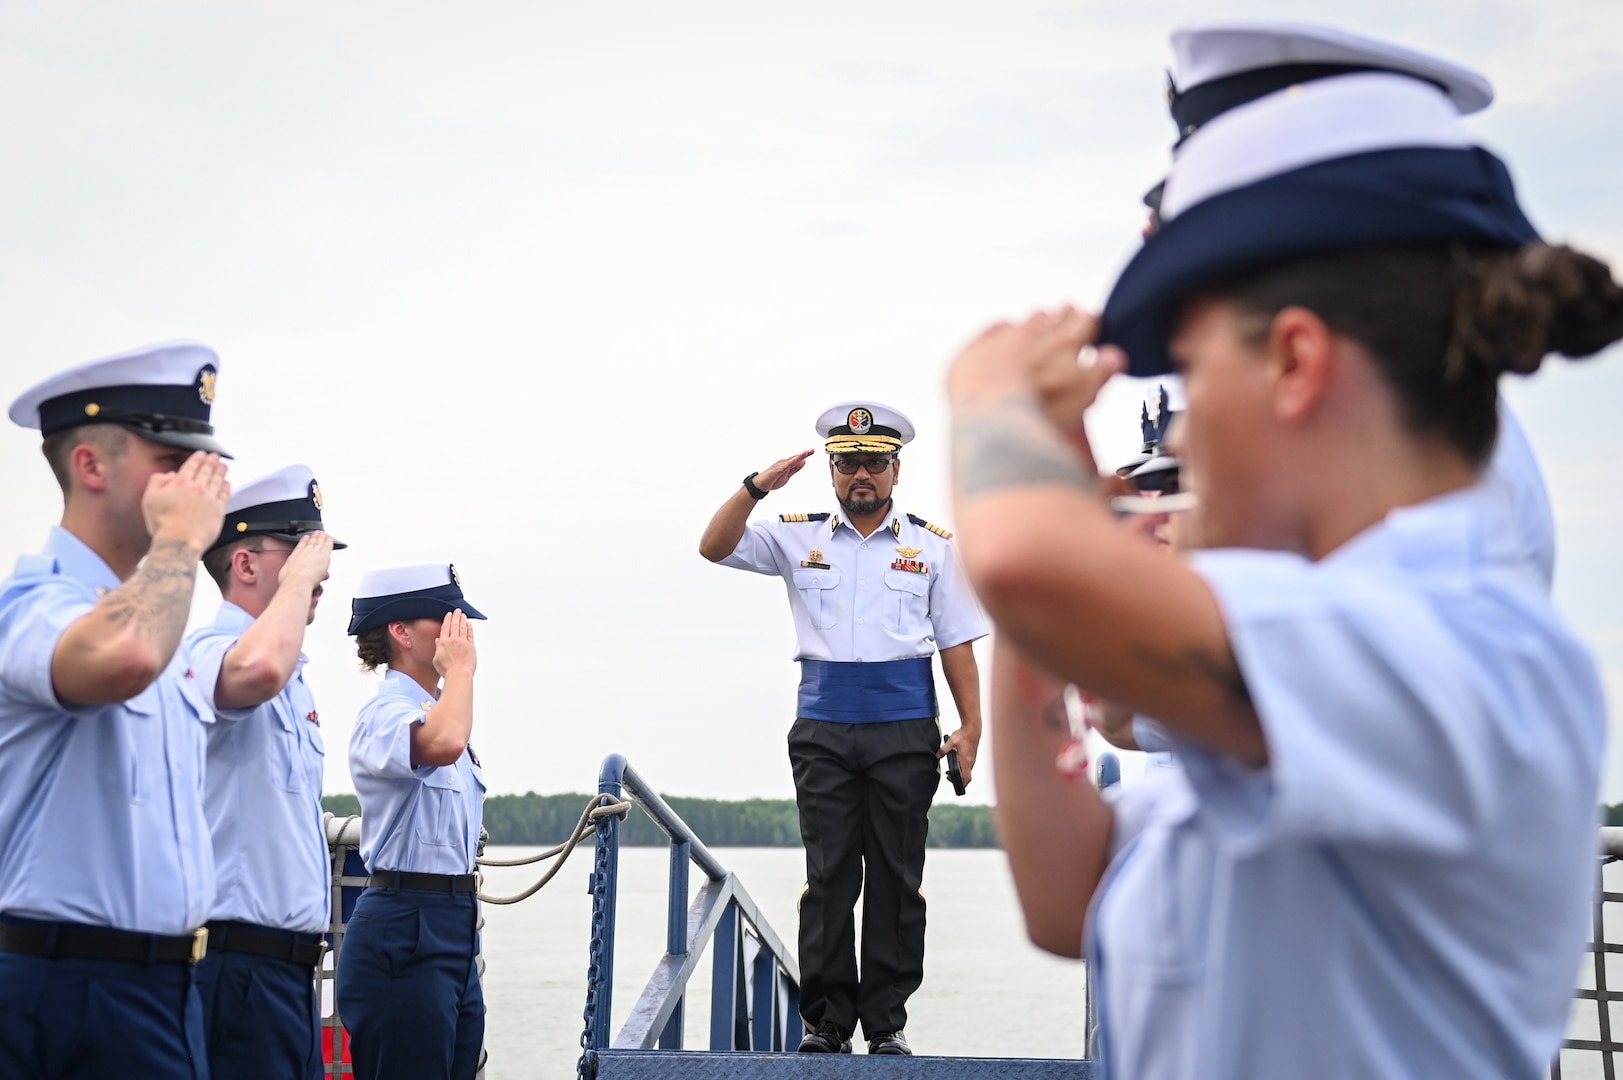 Capt. Abdul Muhaimin Bin Muhammad Salleh, Malaysian Maritime Enforcement Agency, salutes as he arrives aboard U.S. Coast Guard Cutter Bertholf (WMSL 750) during a reception held aboard the cutter while it was moored in Port Klang, Malaysia, March 2, 2024. The event, hosted by the crew of the Bertholf, brought together dignitaries from multiple Malaysian government agencies. (U.S. Coast Guard photo by Petty Officer Steve Strohmaier)